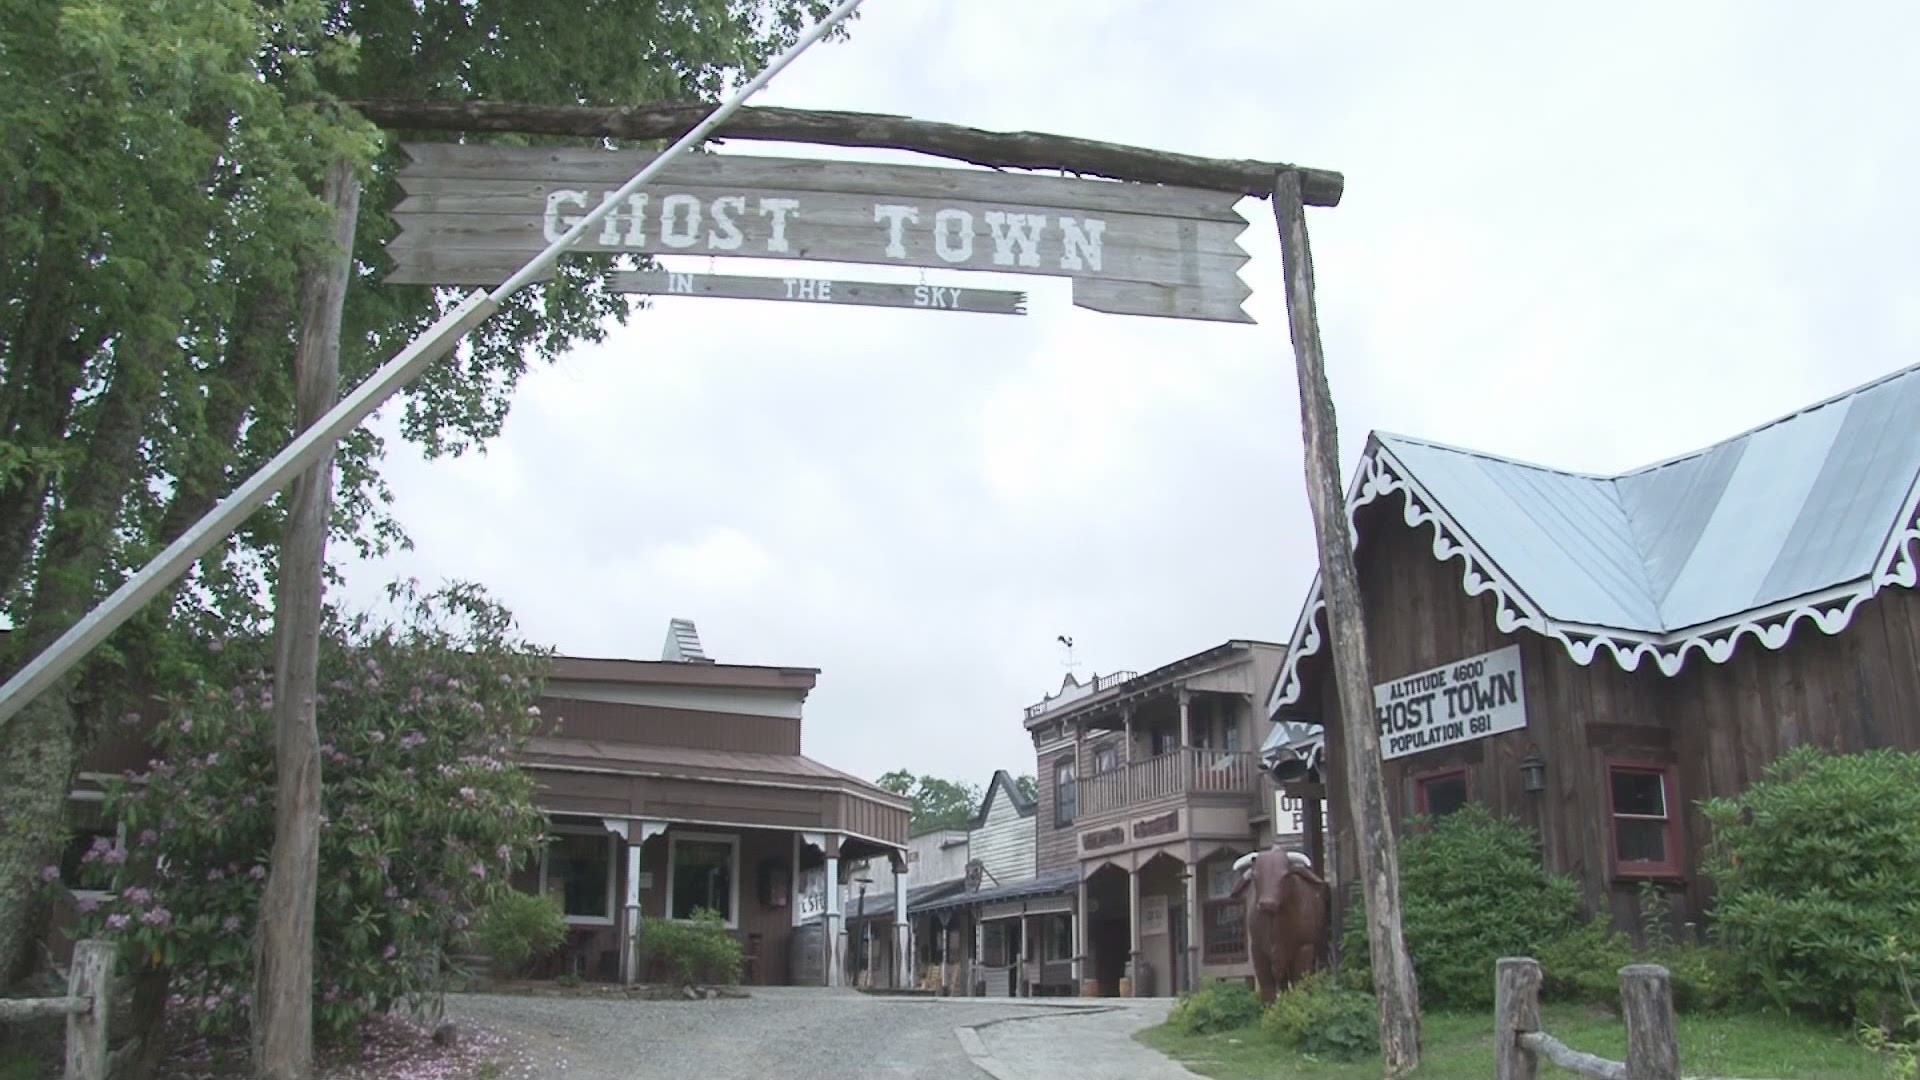 The old Ghost Town in the Sky amusement part in Maggie Valley, NC, briefly reopened in 2014 before closing again.